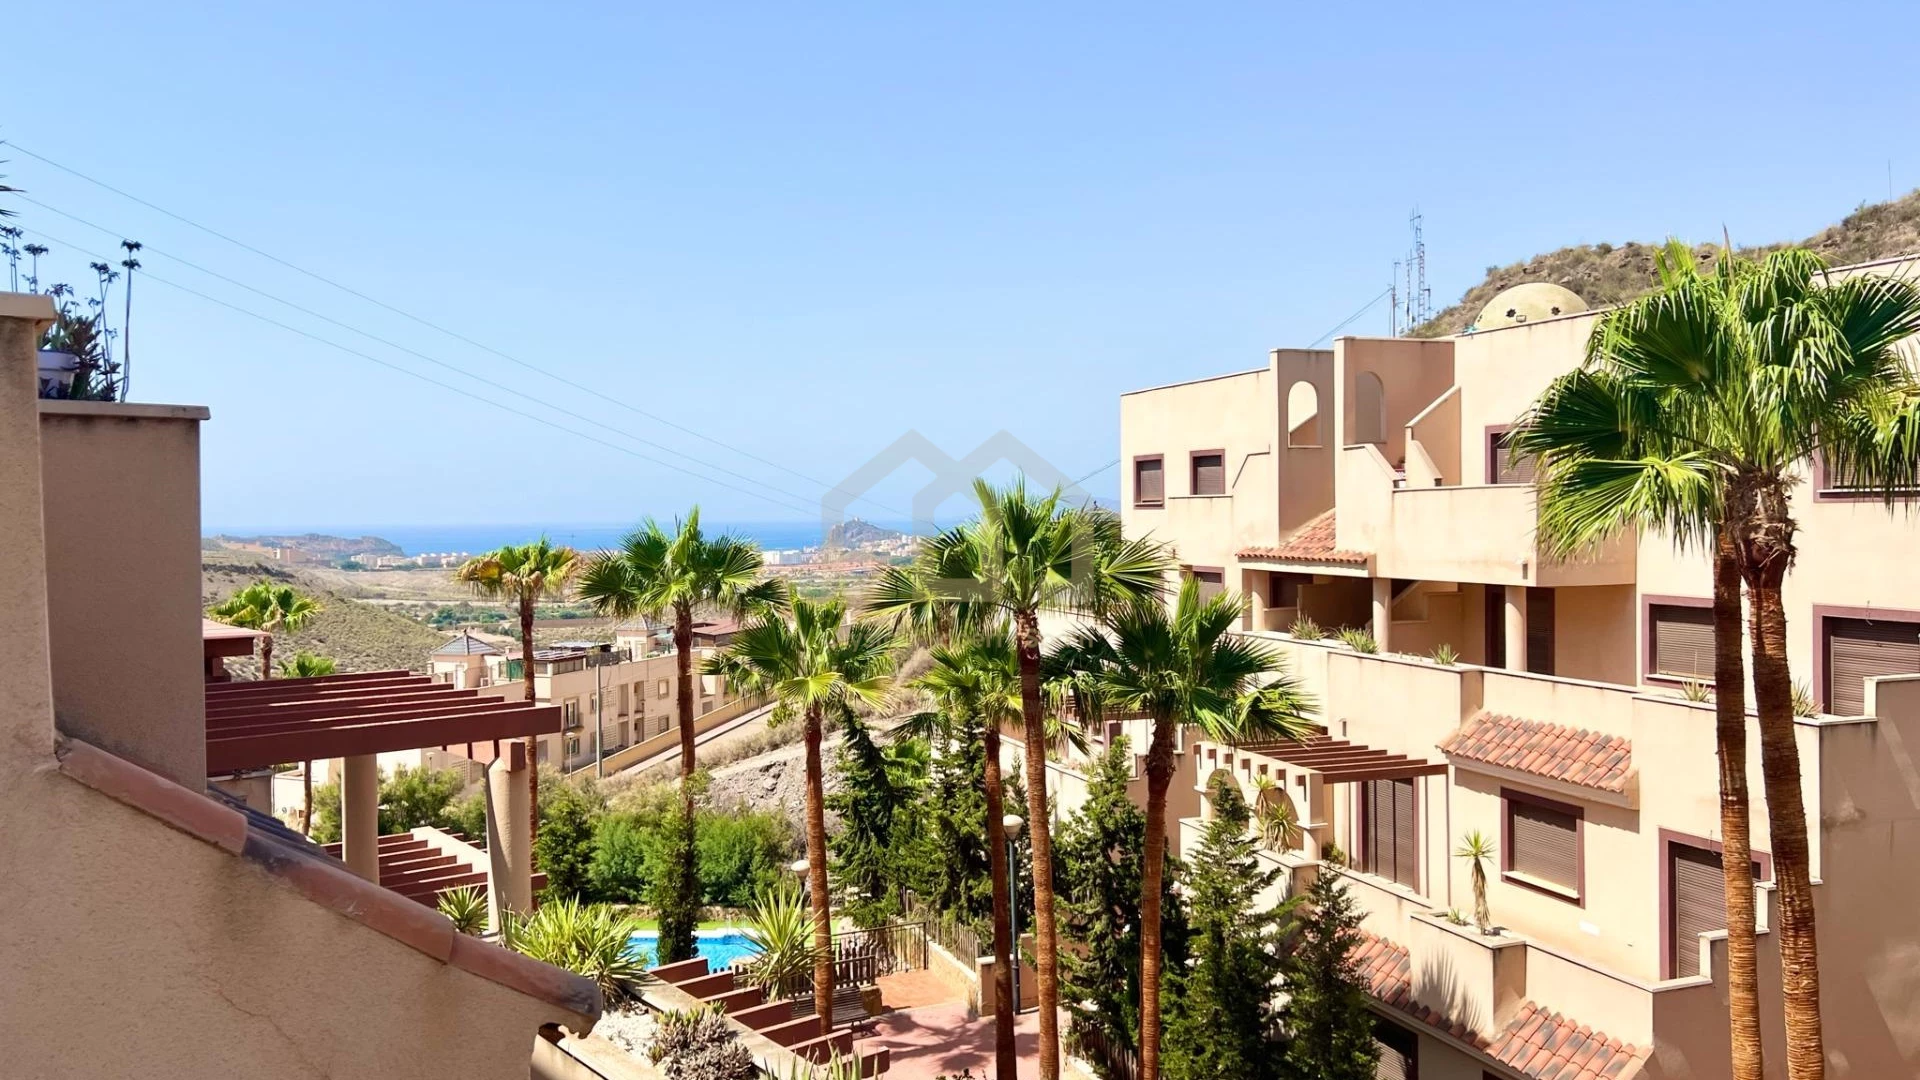 Águilas, Collado bajo, Penthouse, N7378, NEW BUILD KEY READY RESIDENTIAL COMPLEX IN AGUILAS